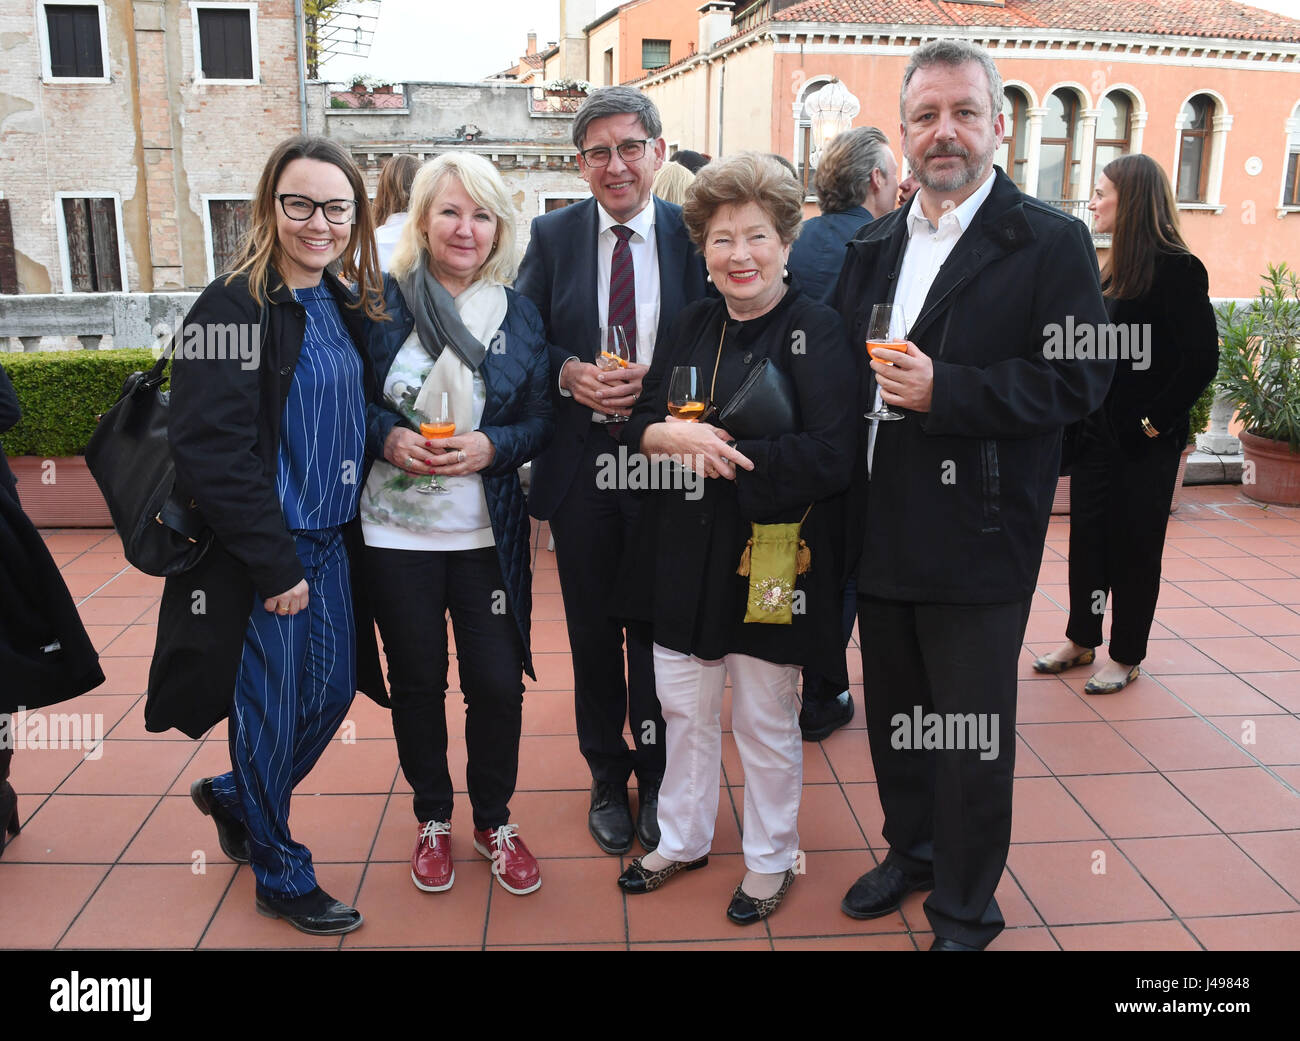 Venice, Italy. 10th May, 2017. Politician Michelle Muentefering (SPD, l-r),  politician Angelika Krueger-Leissner (SPD), Ronald Graetz, secretary  general of Germany's Institute for Foreign Relation, politician Ursula  Seiler-Albring (FDP), and politician ...